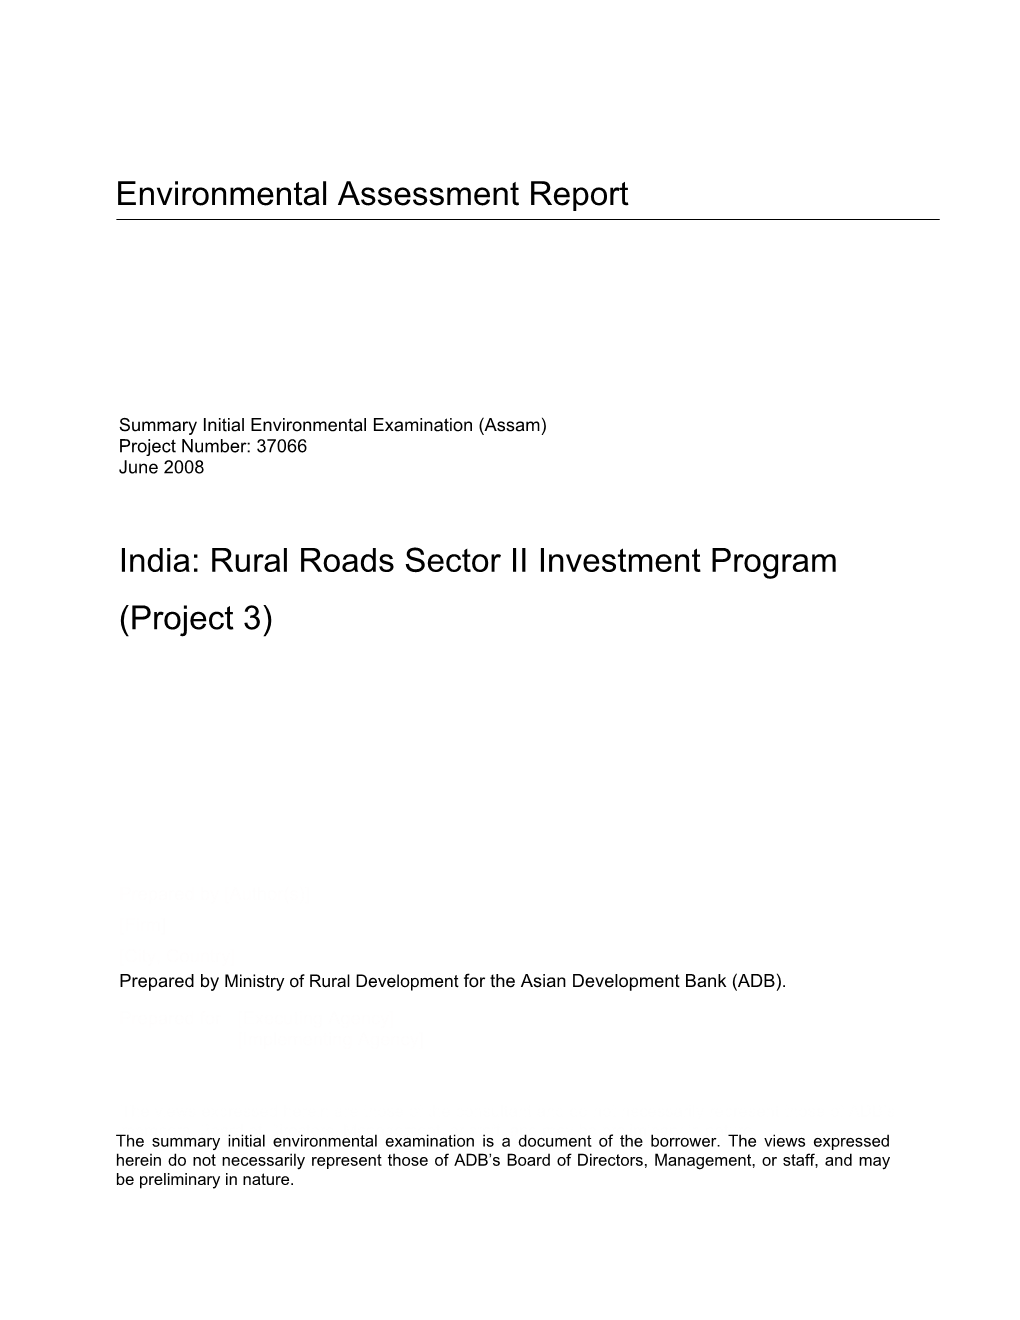 IEE: India: Rural Roads Sector II Investment Program (Project 3